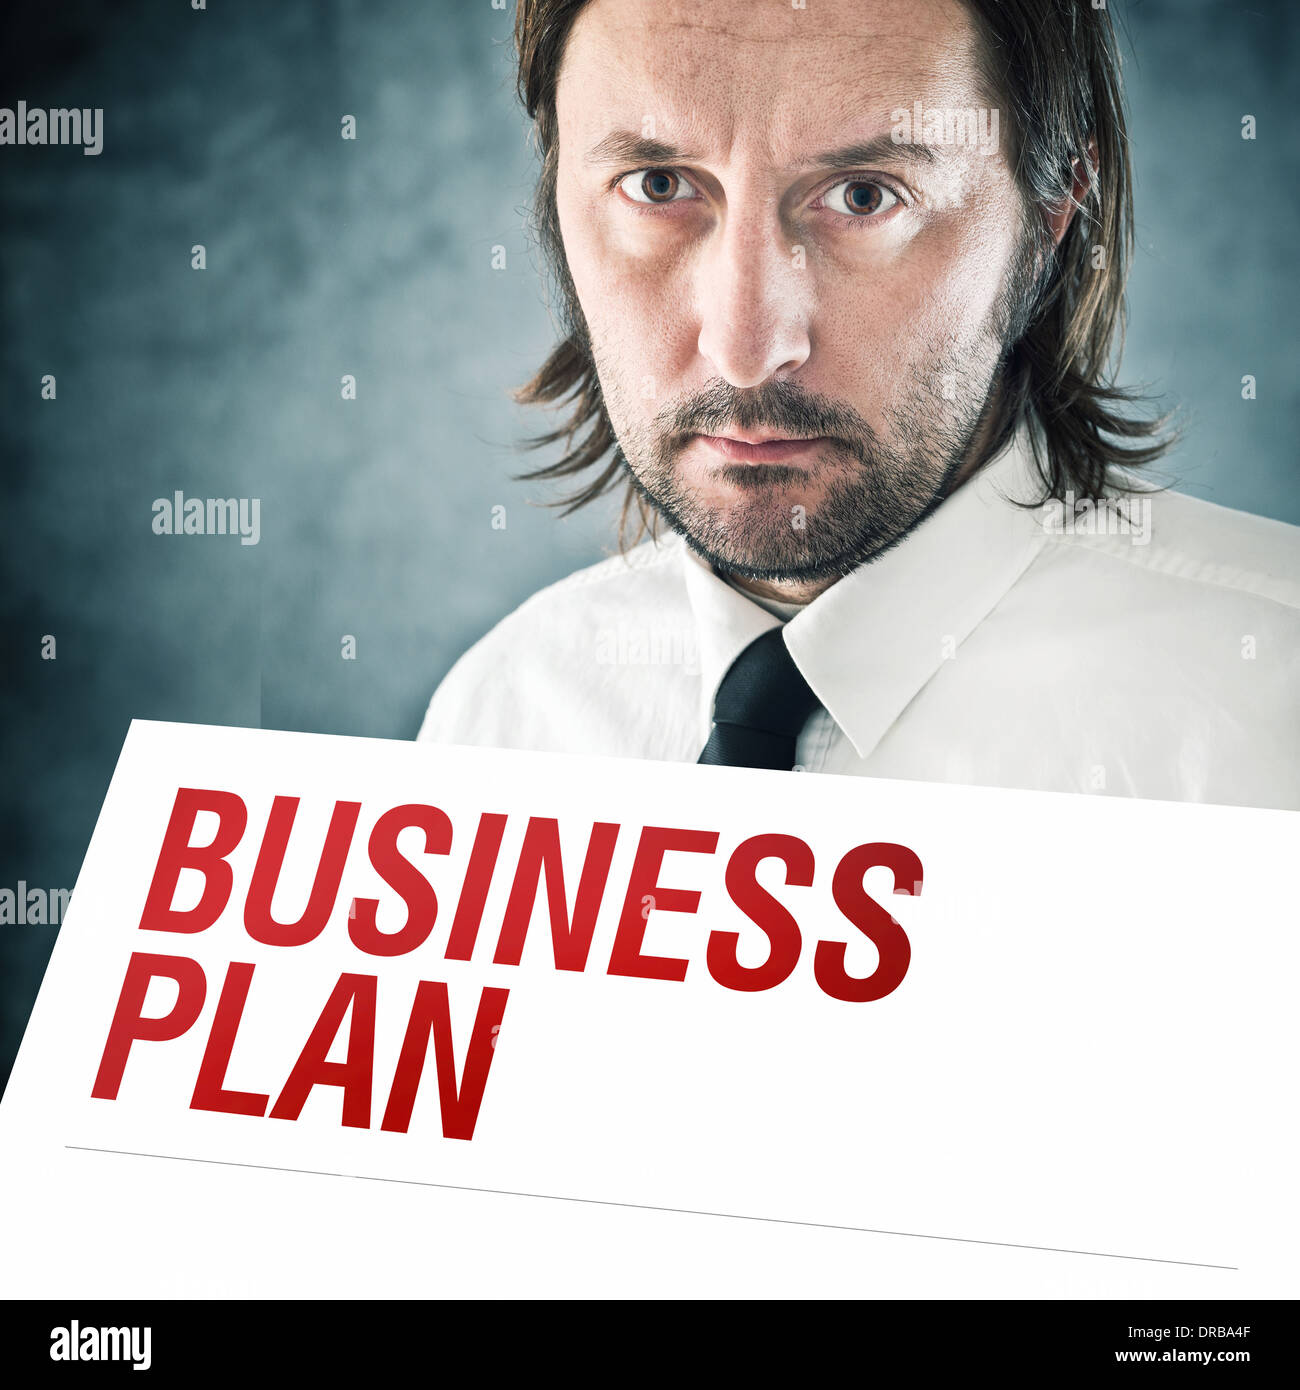 Businessman holding poster with business plan printed title. Business strategy concept. Stock Photo